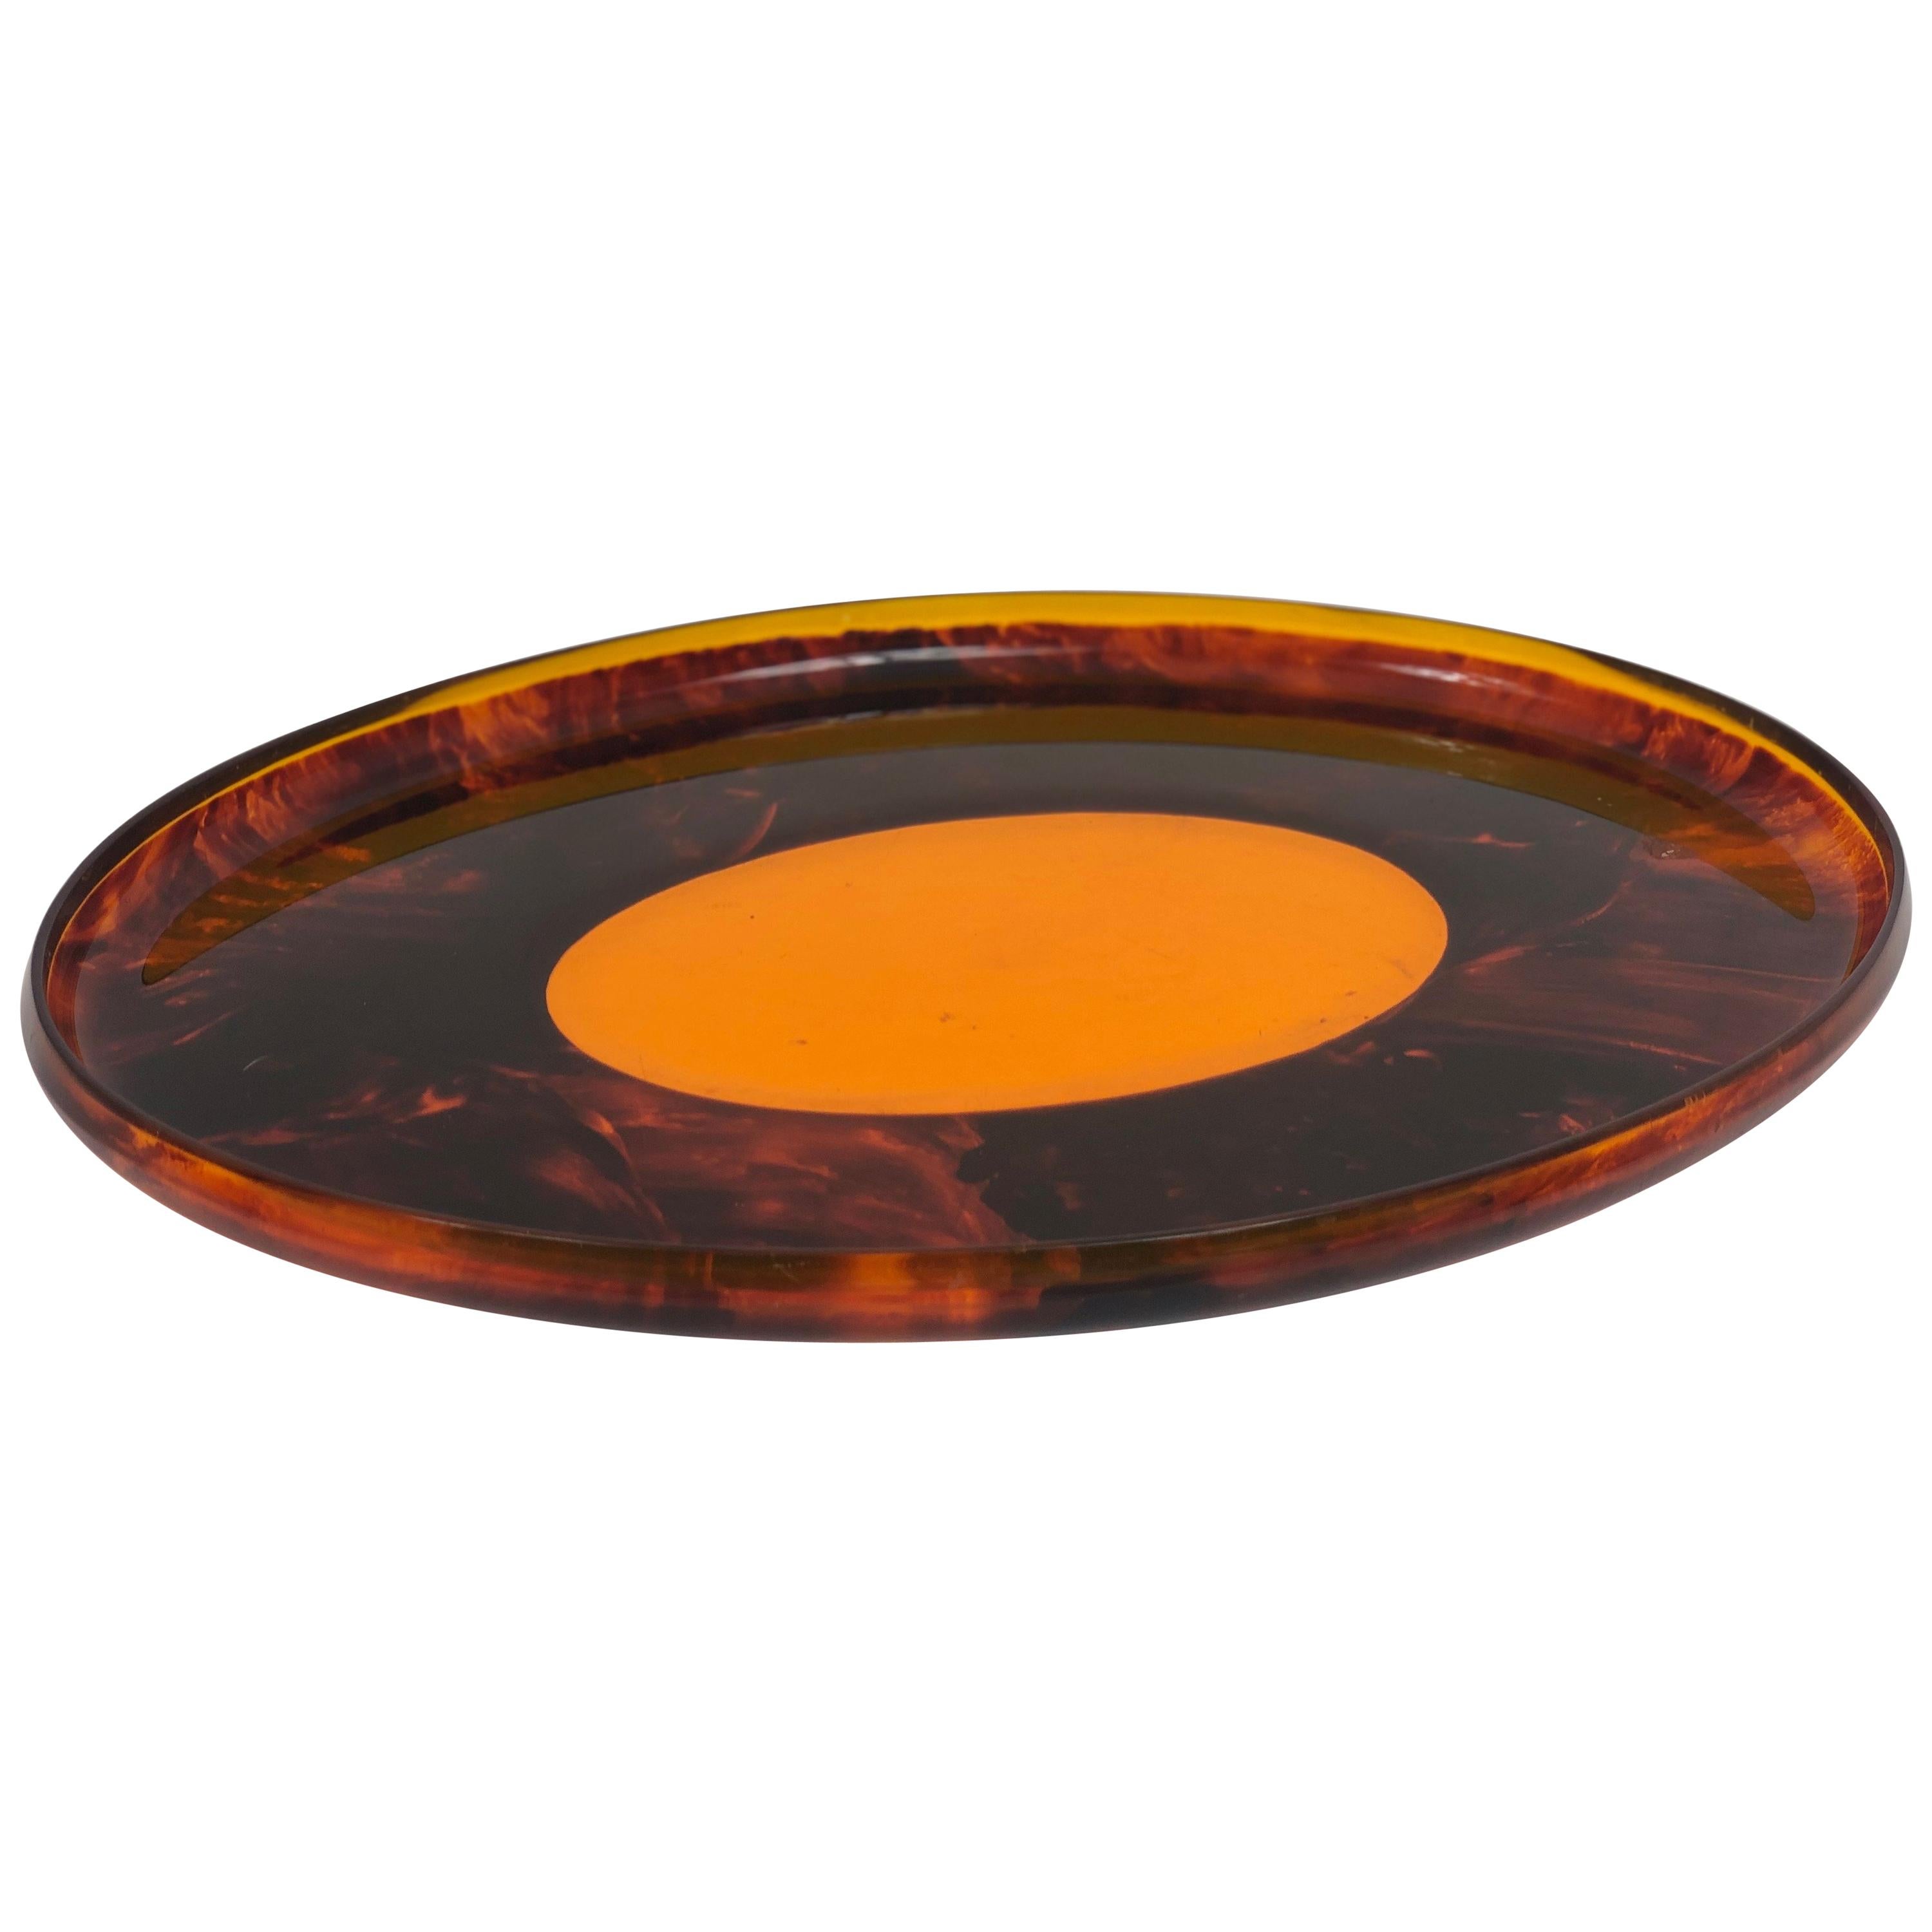 Faux Tortoiseshell Serving Oval Tray Centerpiece in Lucite, 1970s, Italy For Sale